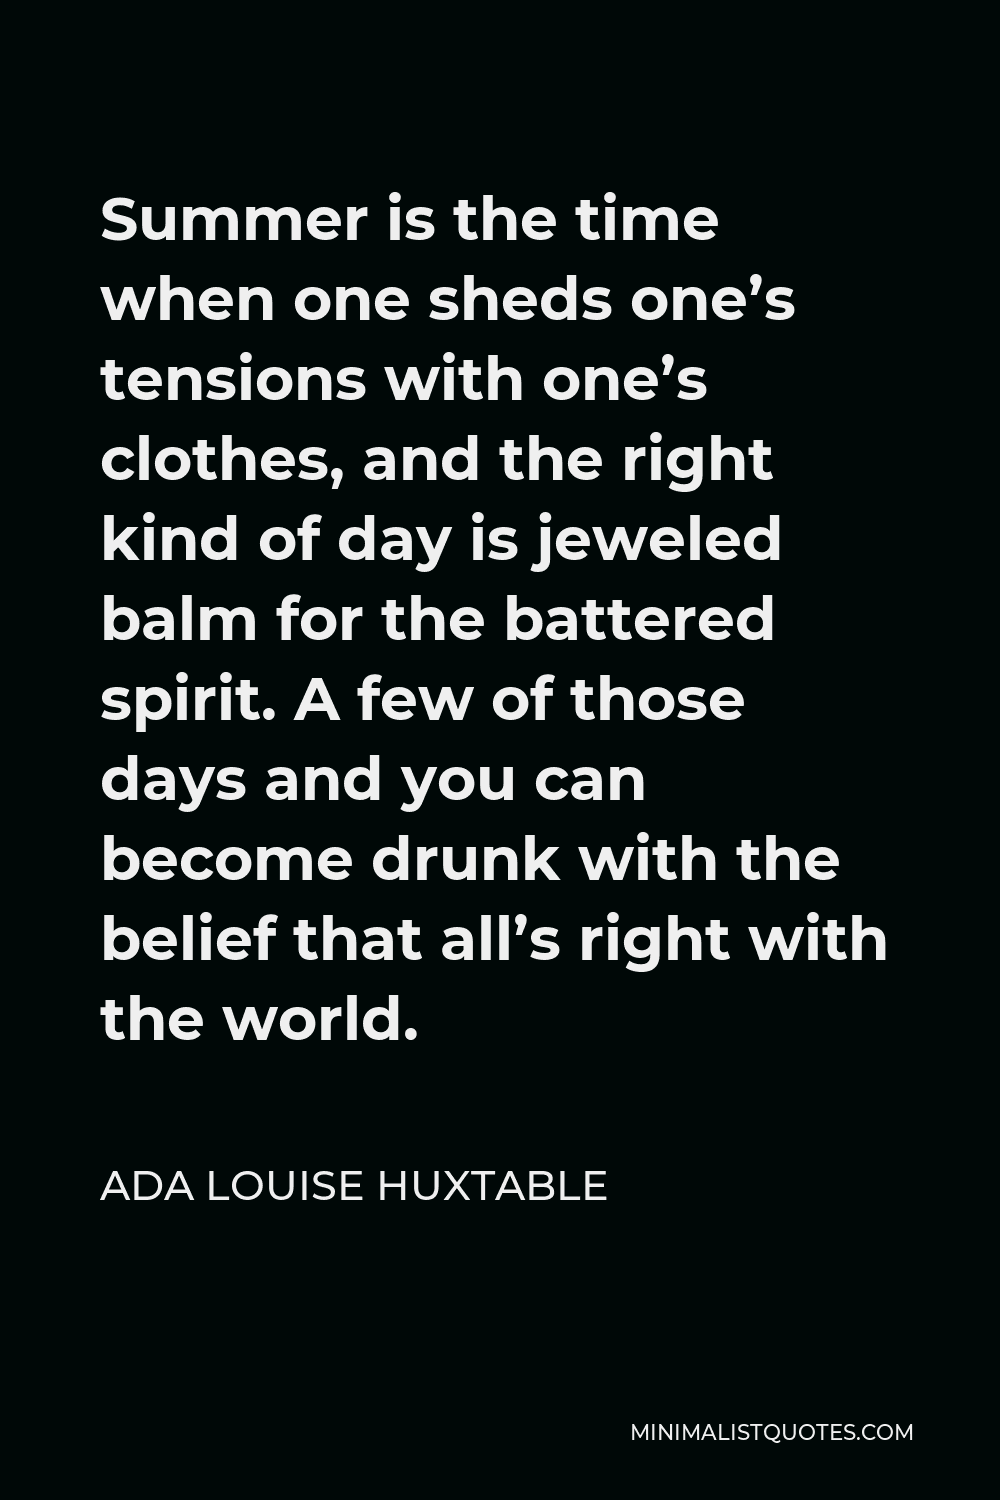 Ada Louise Huxtable Quote - Summer is the time when one sheds one’s tensions with one’s clothes, and the right kind of day is jeweled balm for the battered spirit. A few of those days and you can become drunk with the belief that all’s right with the world.